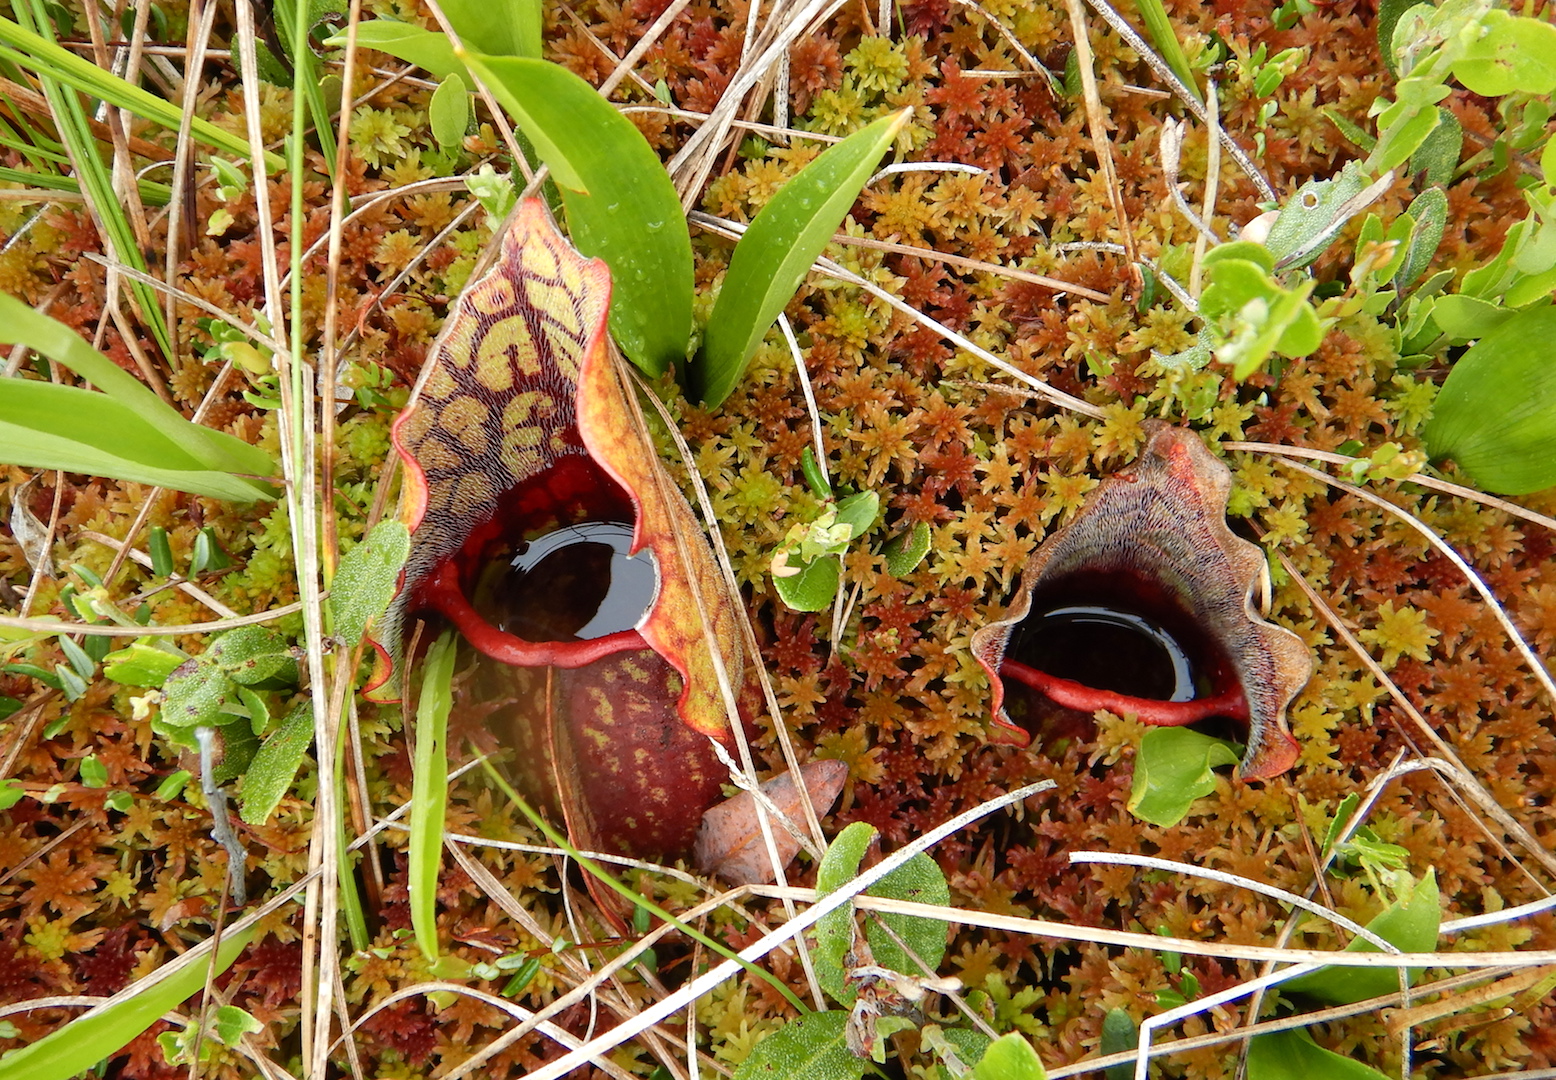 Pitcher plants growing out of a moss bed. Pitchers are red and photo looks into basin of the pitchers.